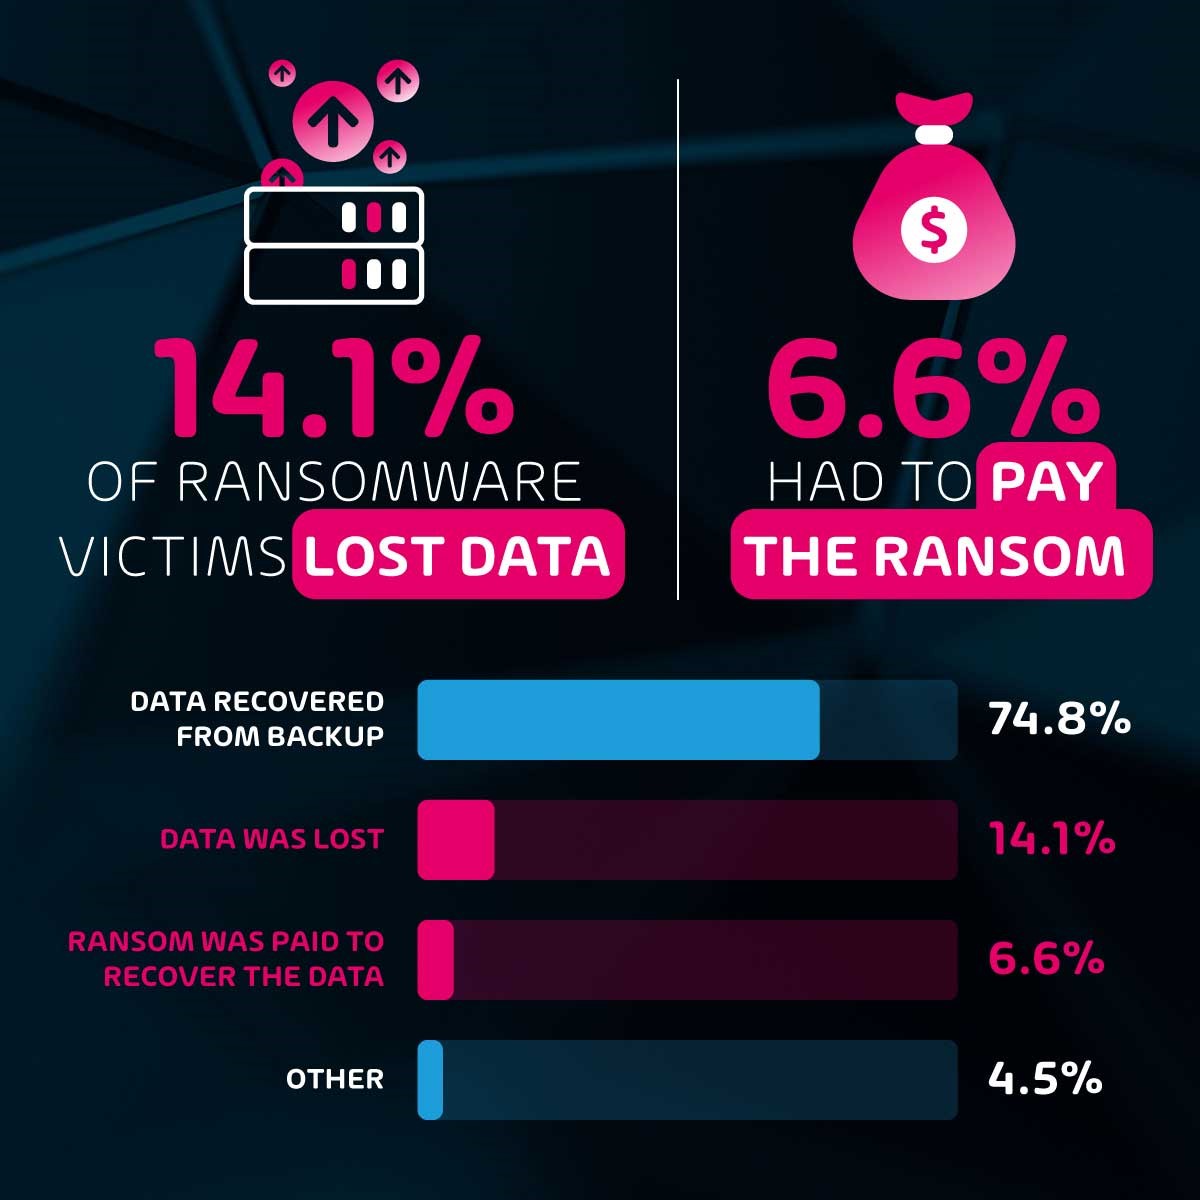 14.1% of ransomware victims lost data, 6.6% had to pay the ransom